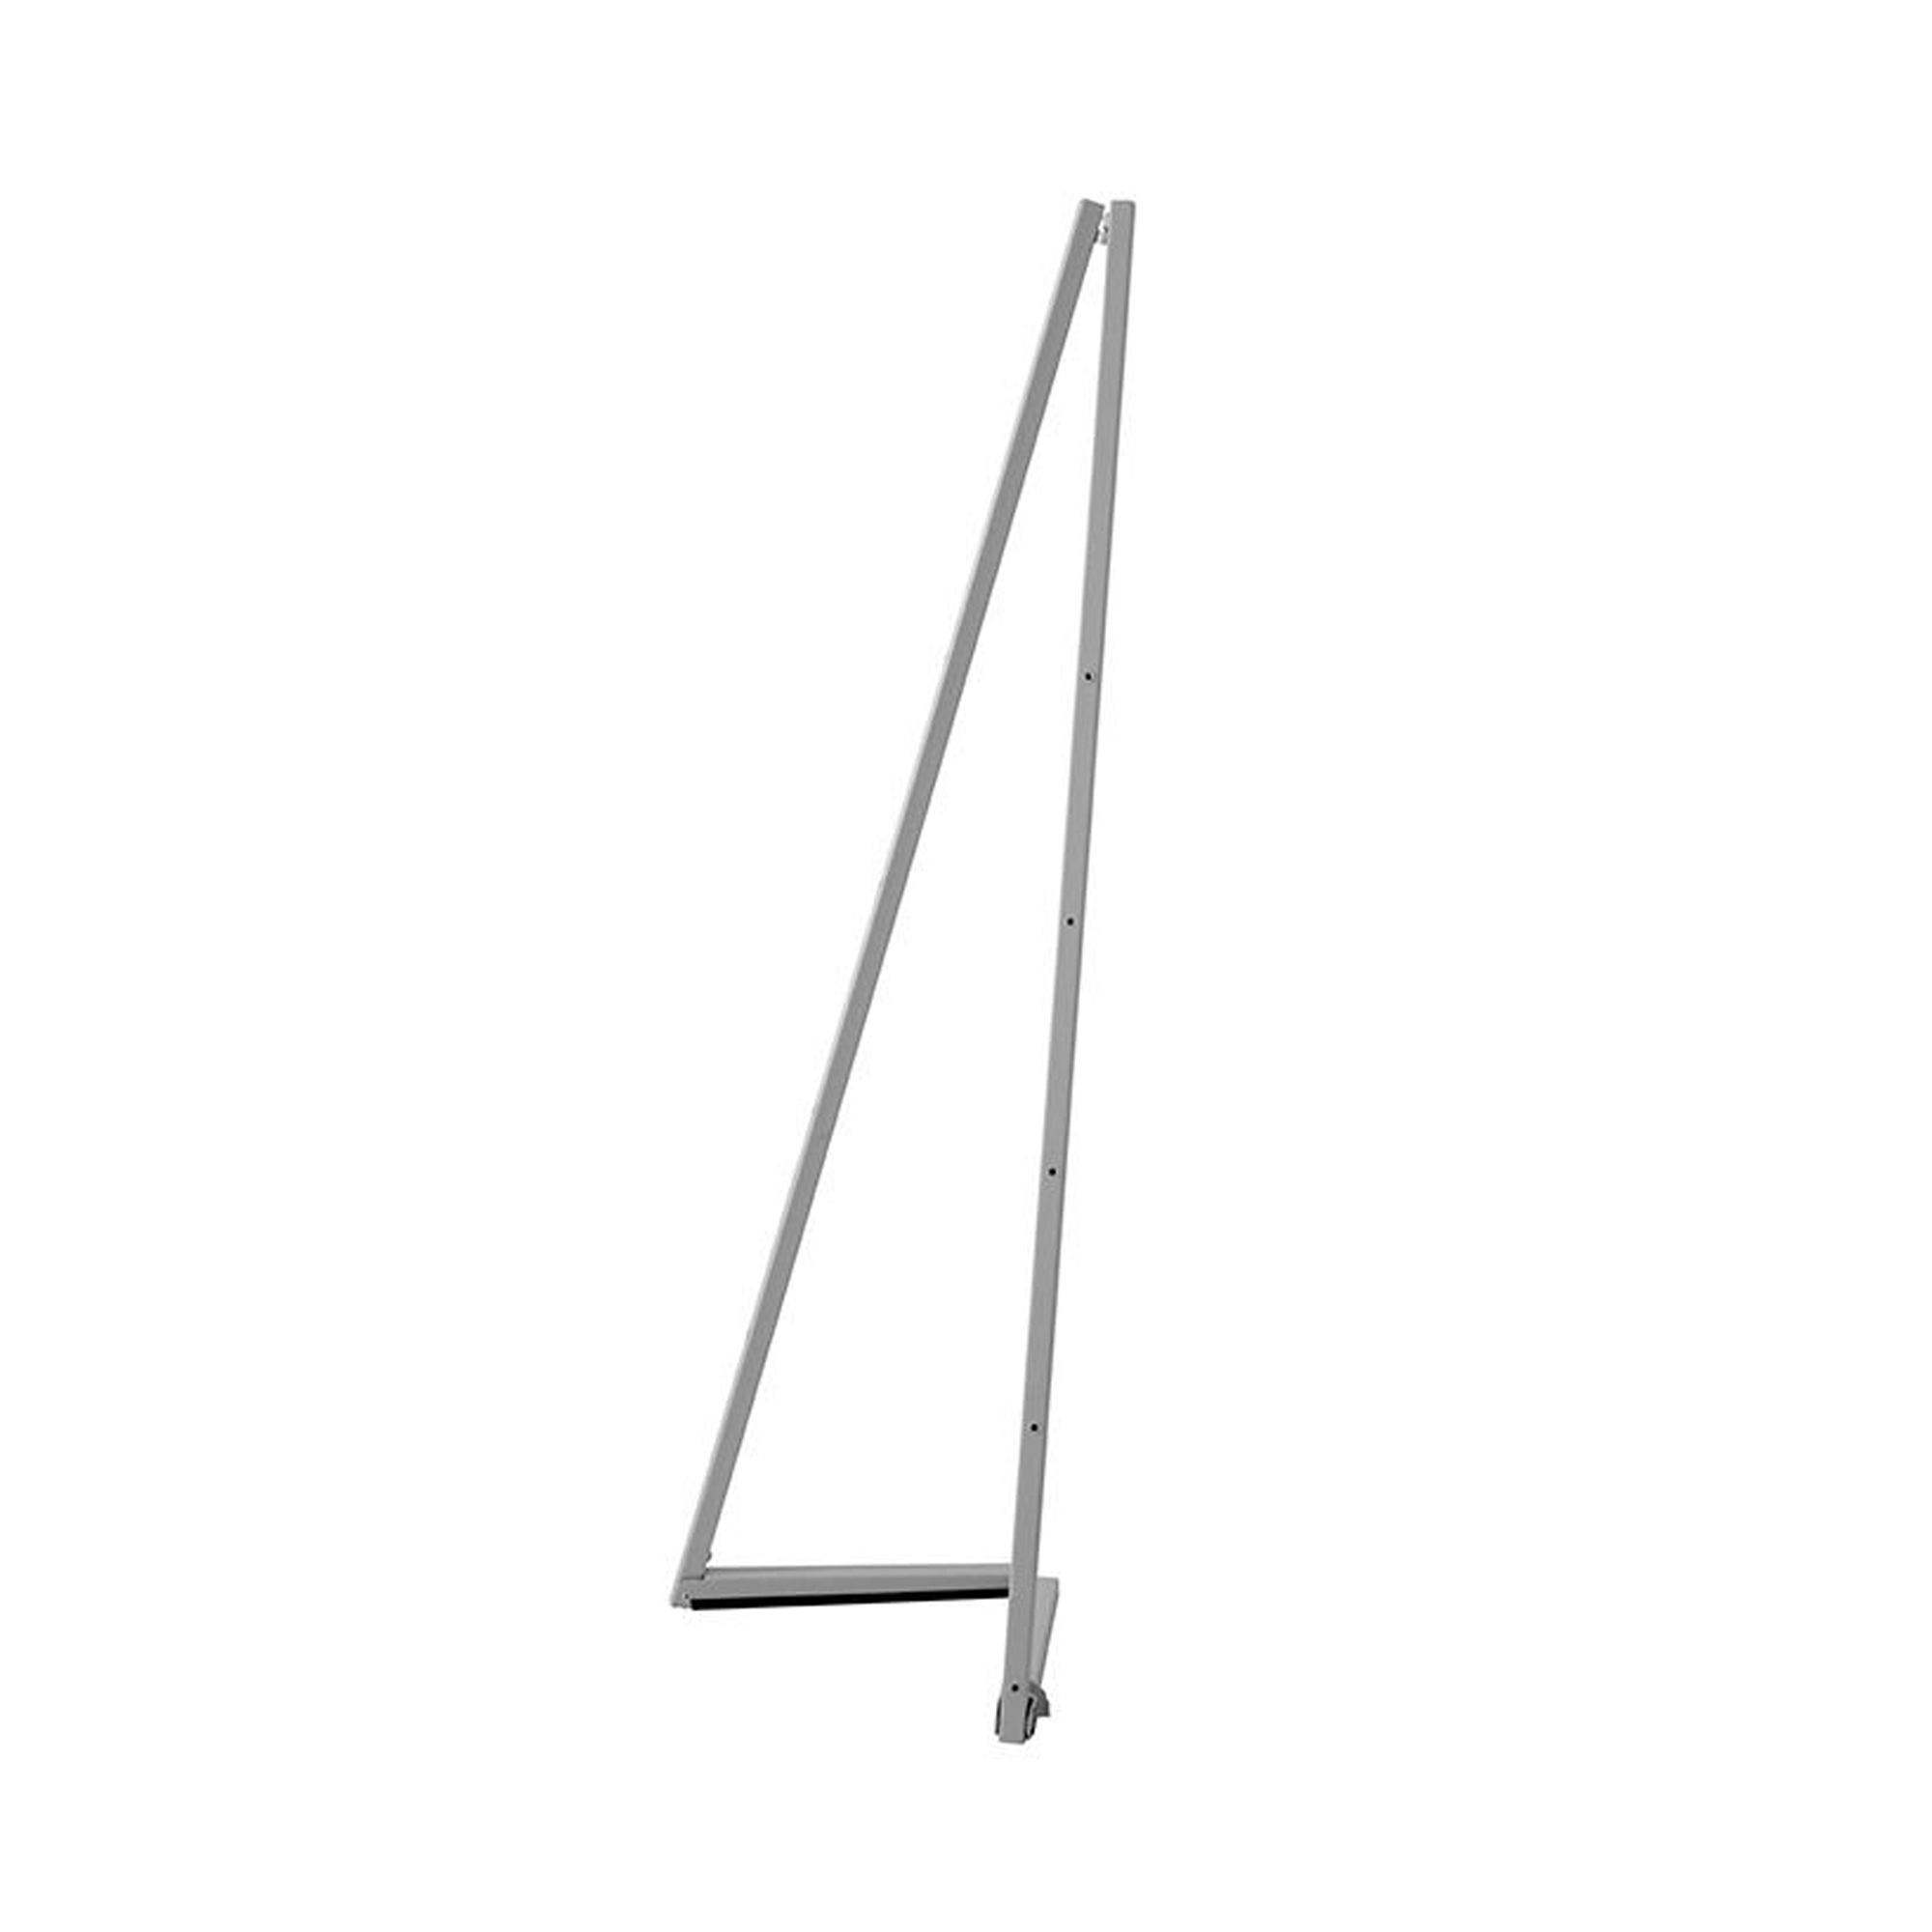 $5/mo - Finance Portable Artist Easel Stand - Adjustable Height